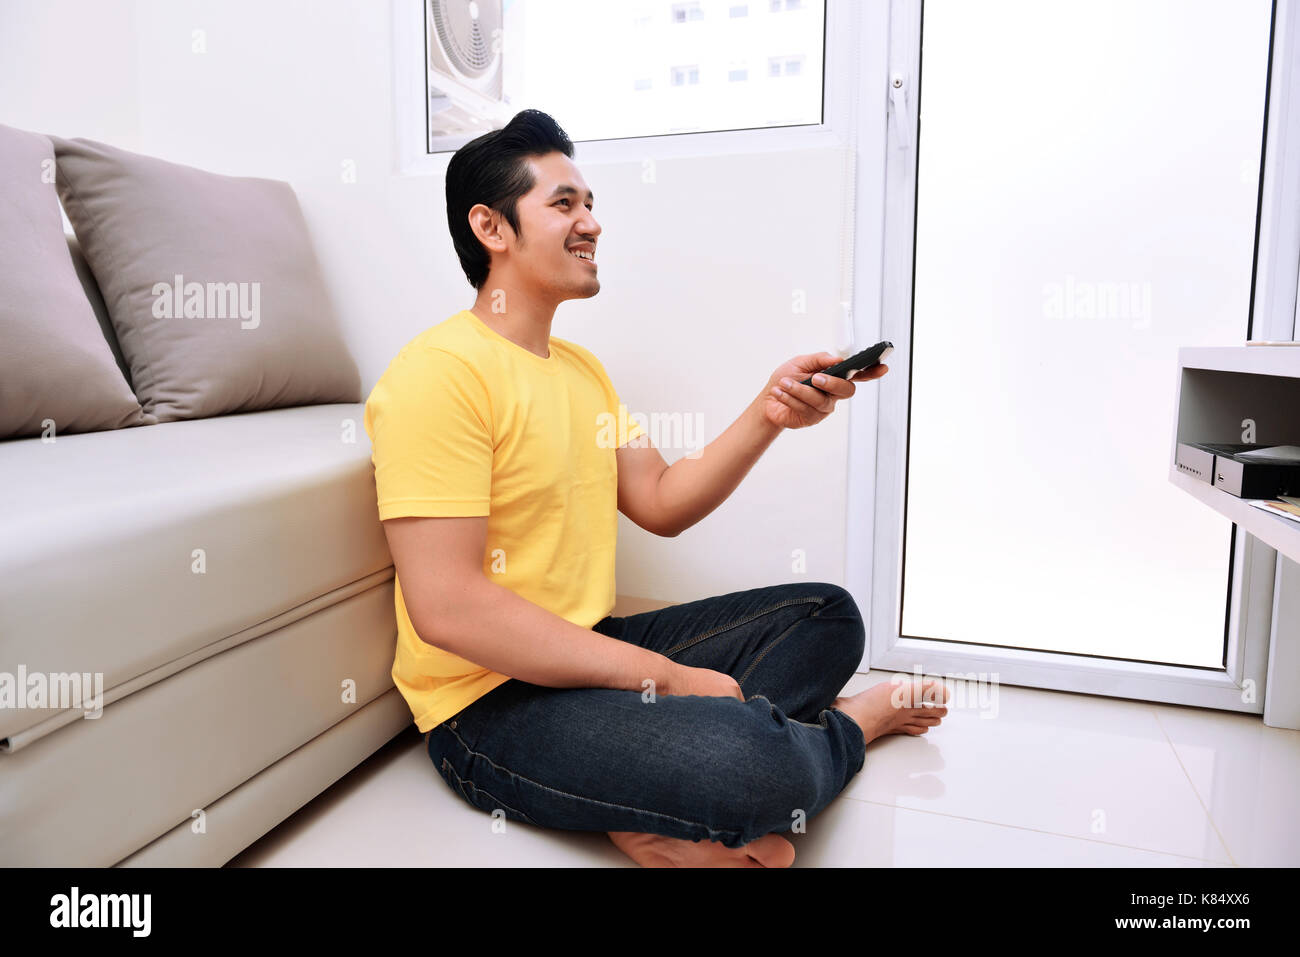 Young asian man holding remote control watching tv while sitting on the floor Stock Photo